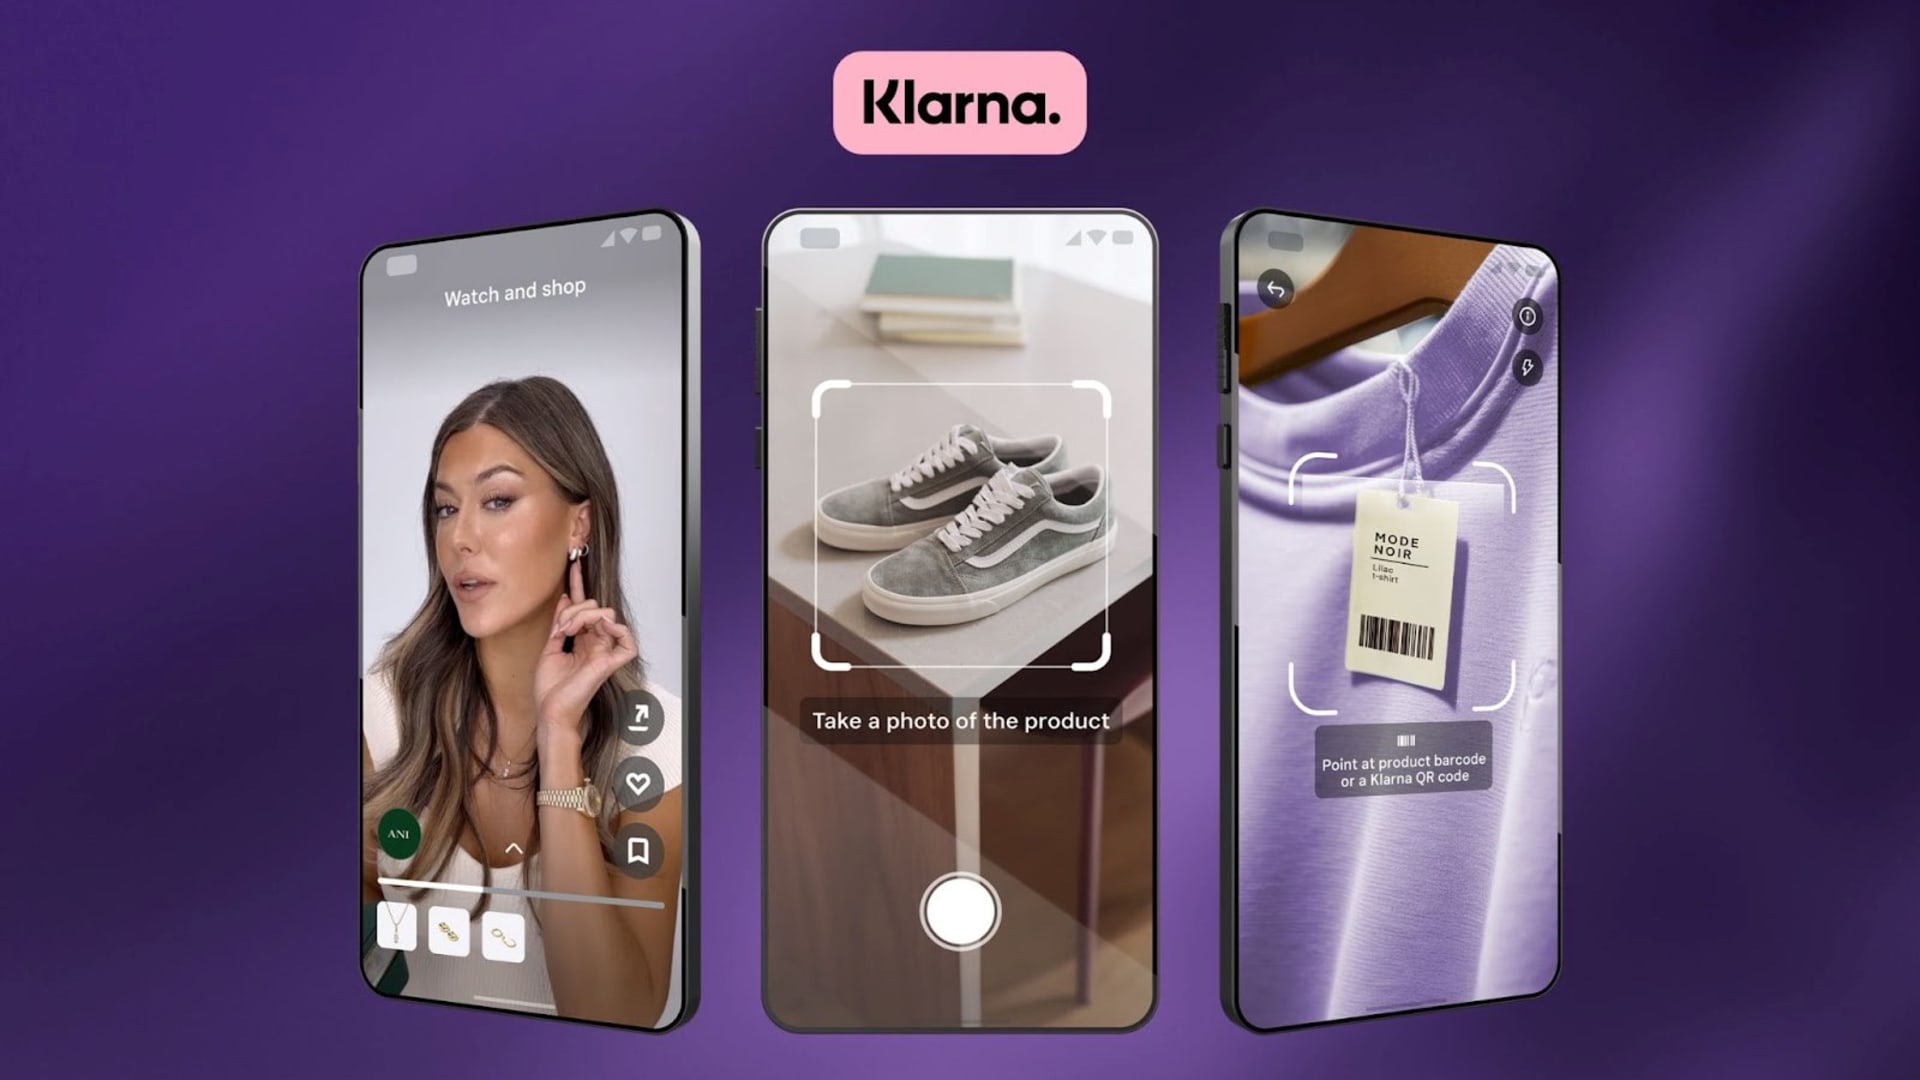 Klarna takes aim at Google and Amazon with AI image recognition tool for shopping